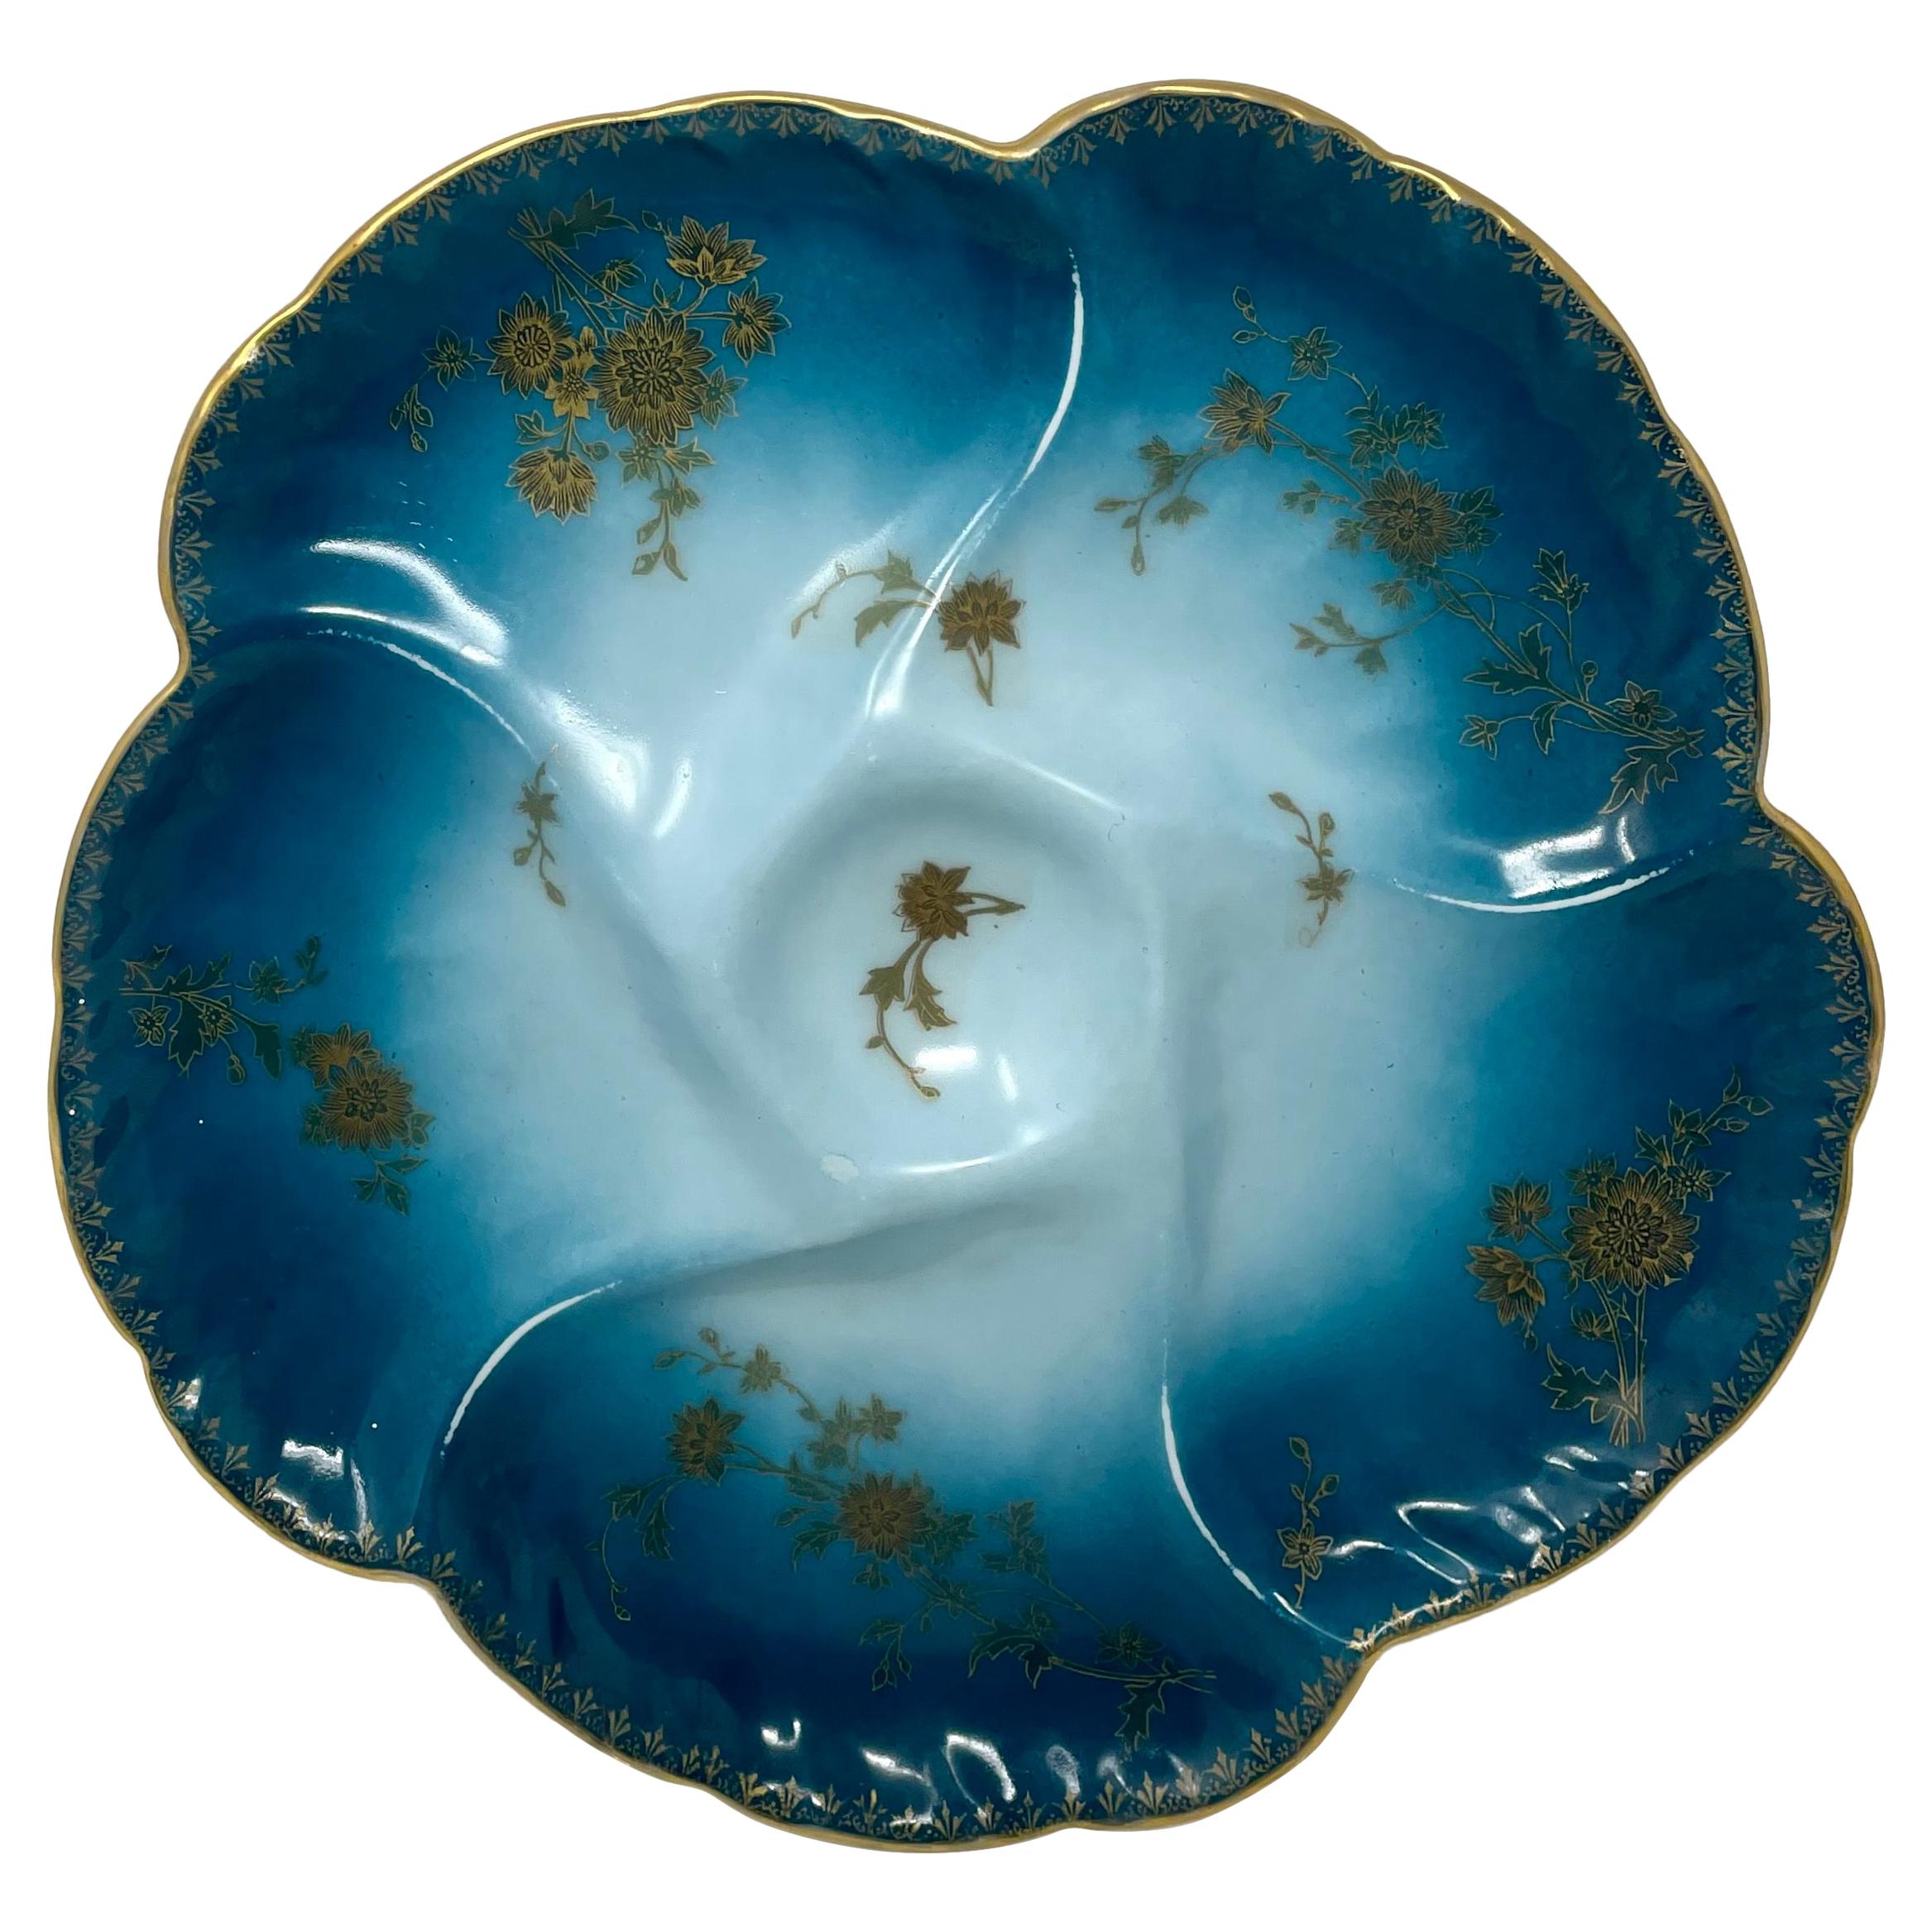 Antique French Turquoise & Peacock Blue Limoges Porcelain Oyster Plate, Ca. 1890